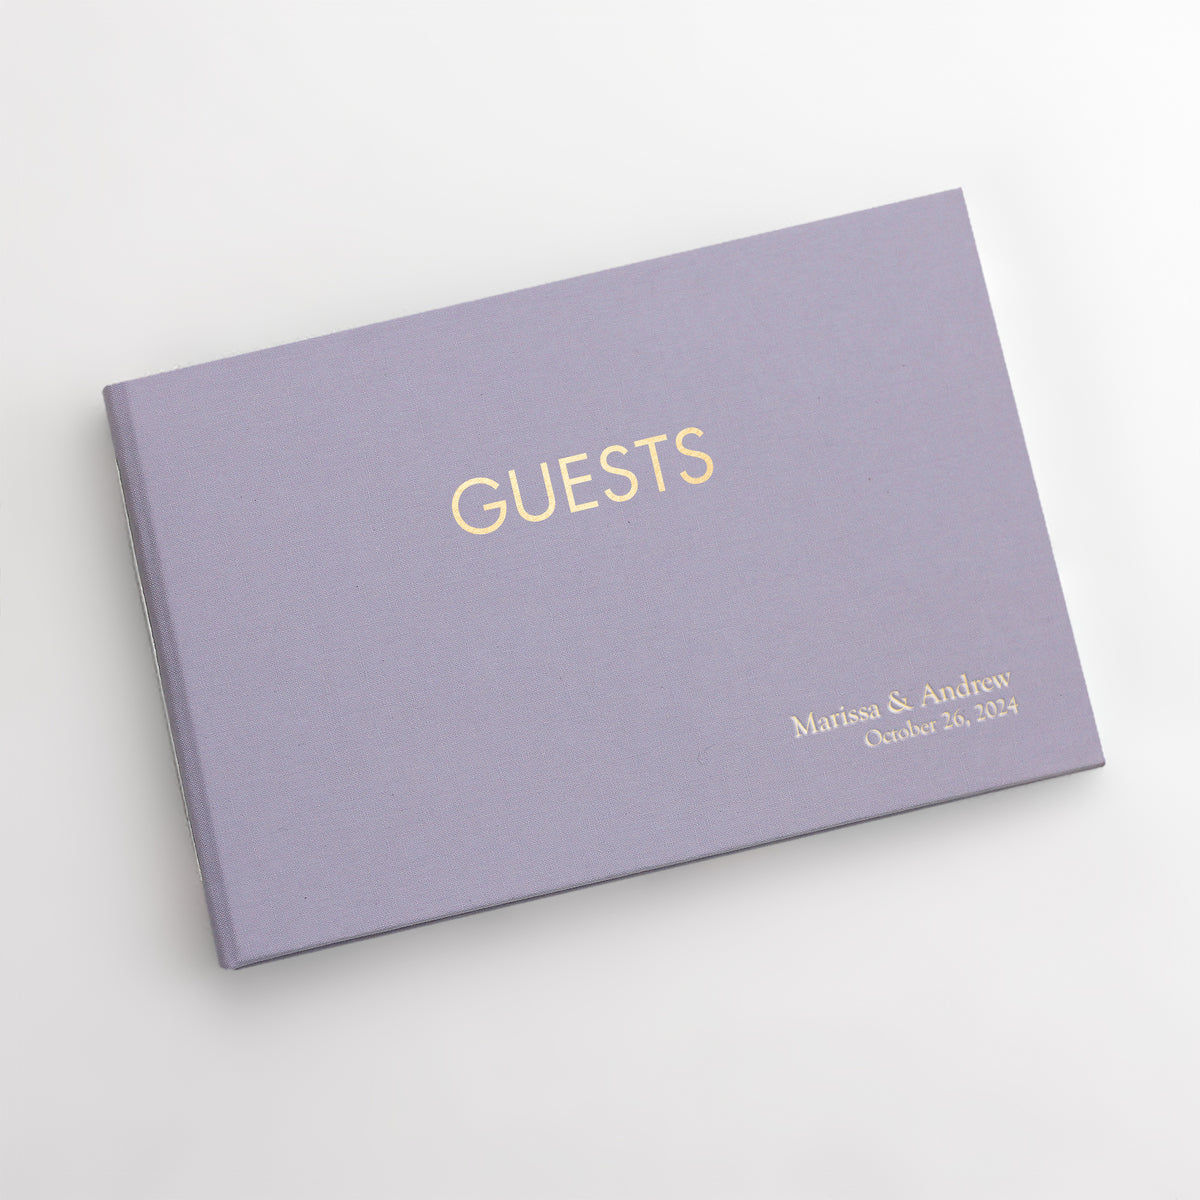 Guestbook Embossed with “Guests” | Cover: Lavender Cotton | Available Personalized